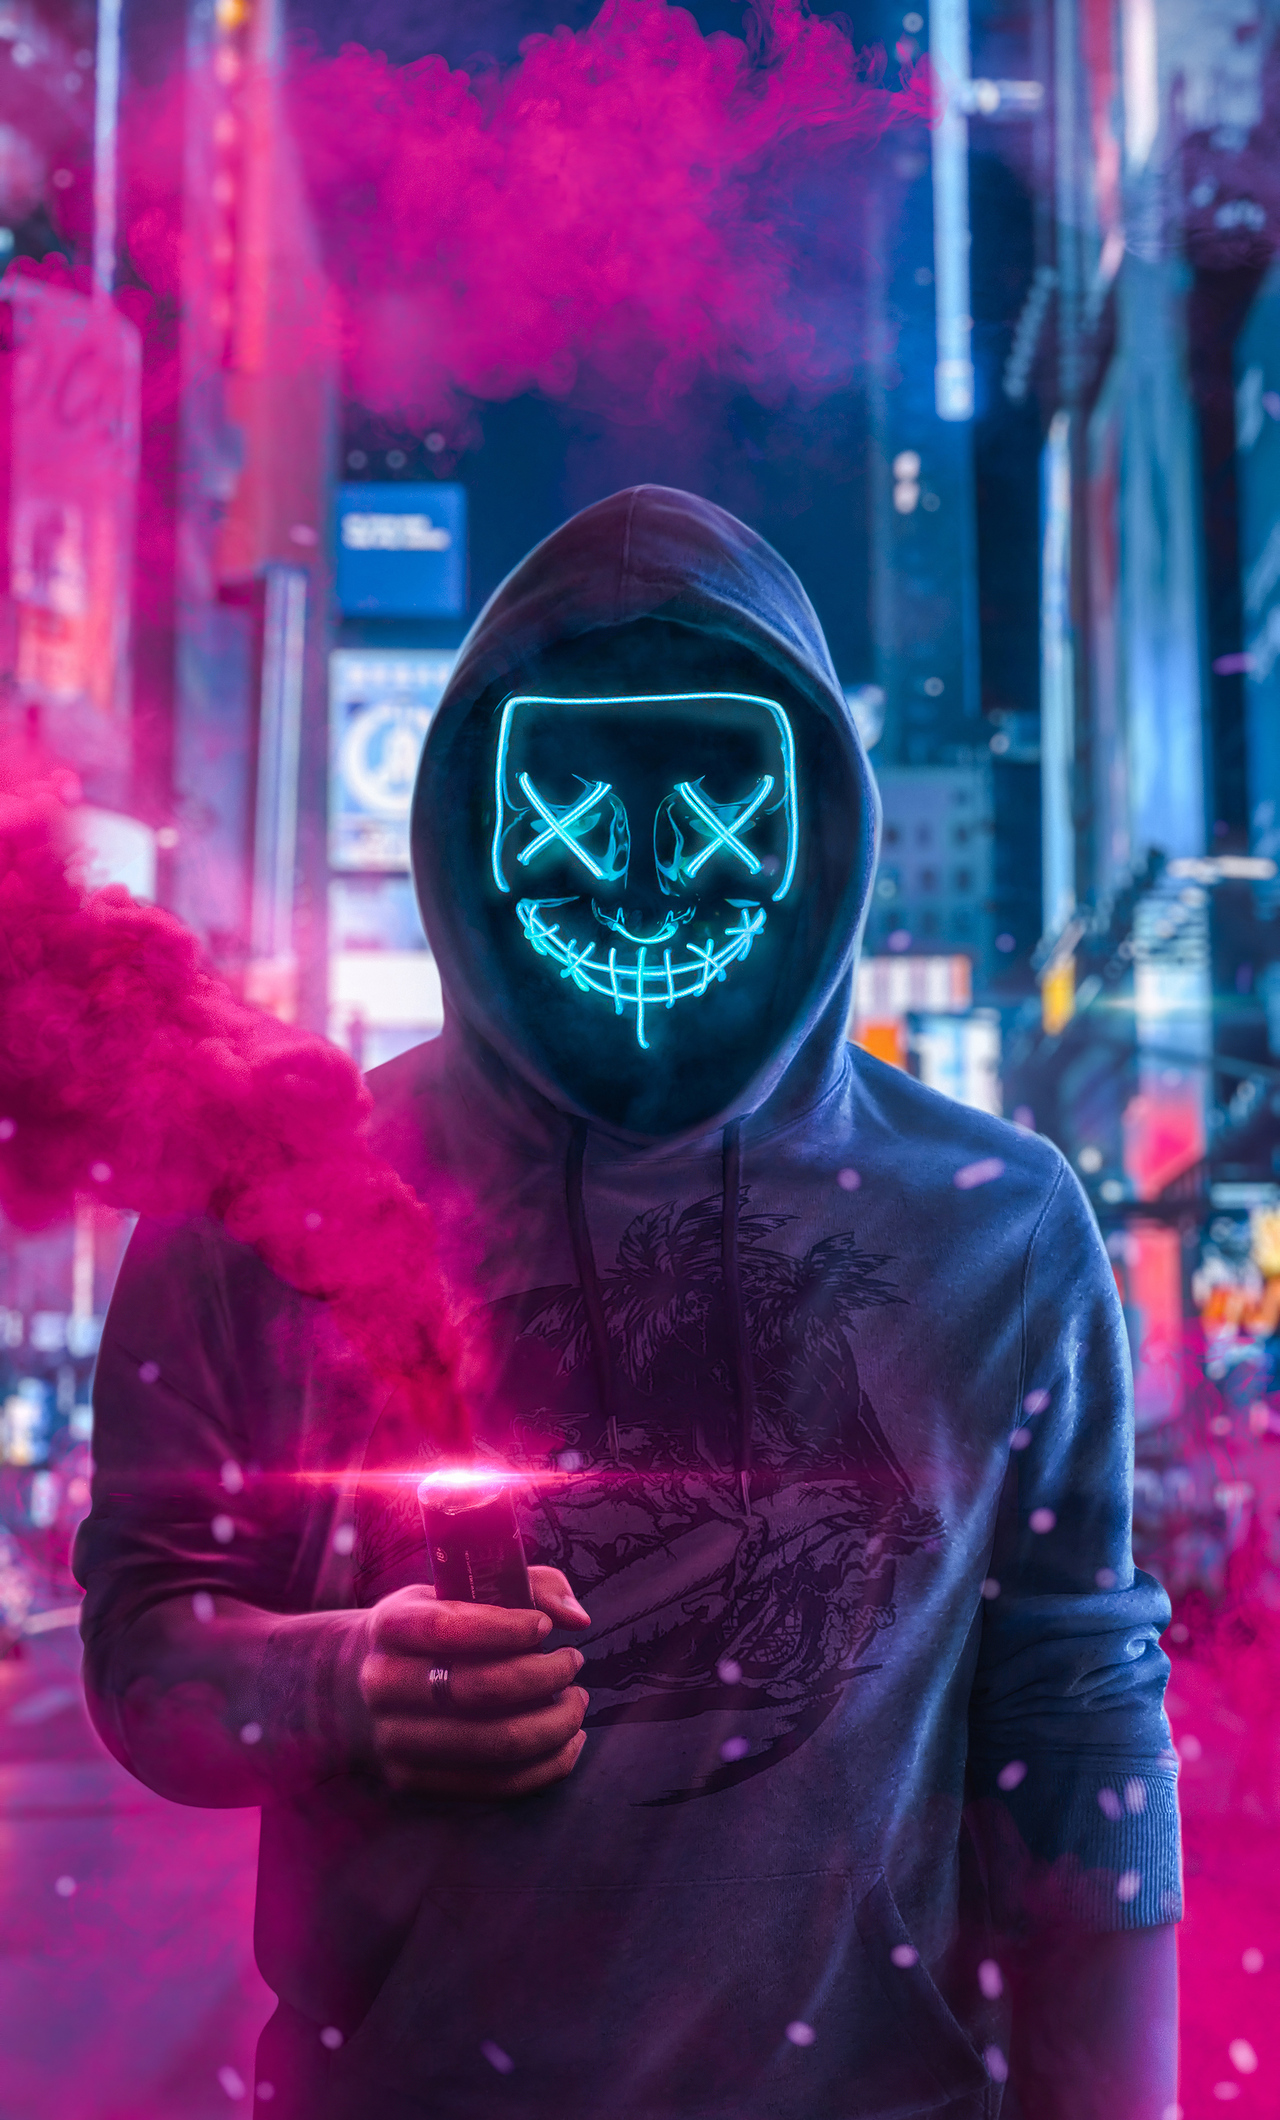 X mask guy with smoke bomb in hand k iphone hd k wallpapers images backgrounds photos and pictures